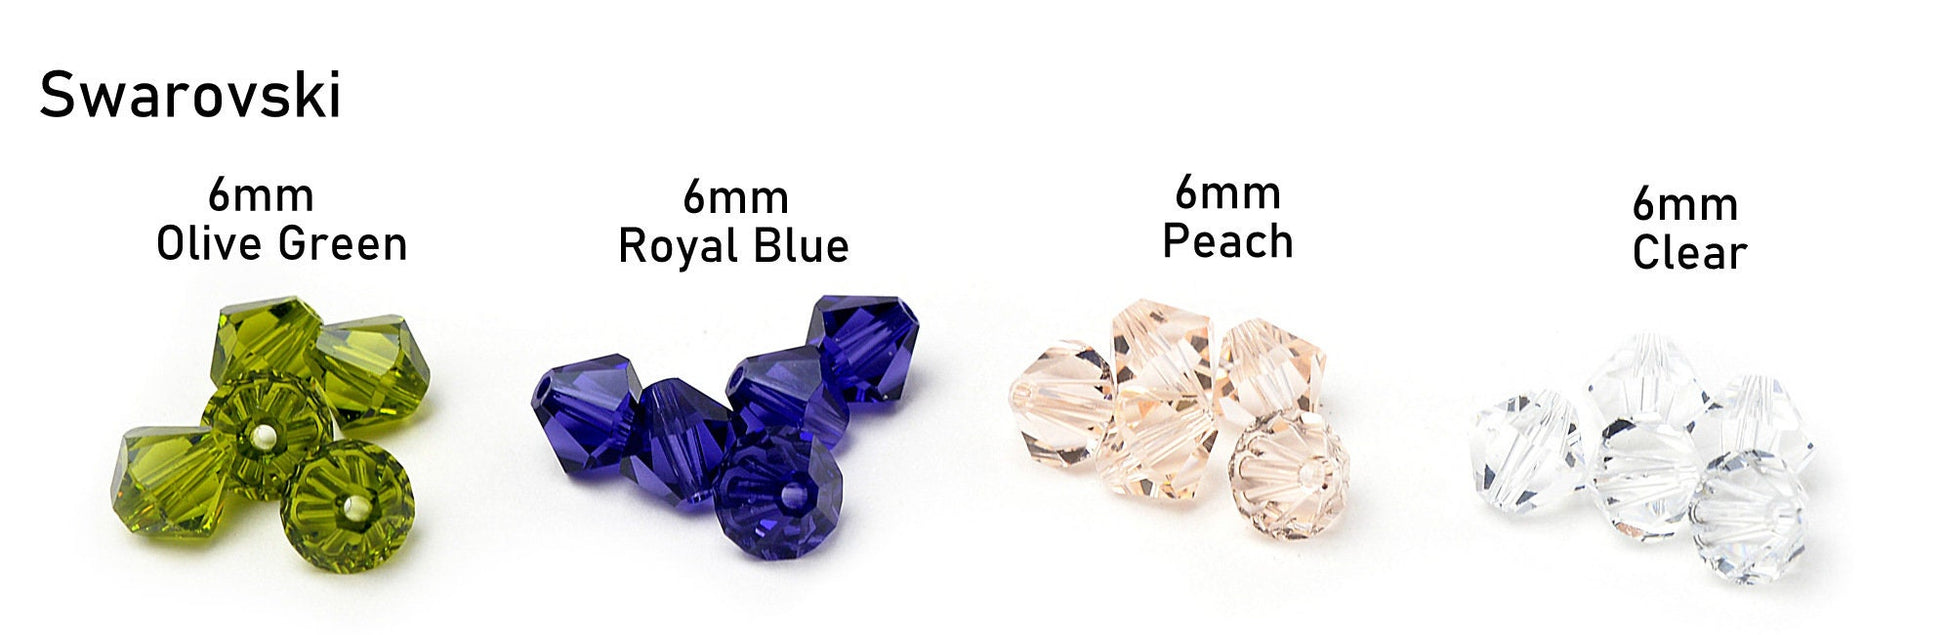 Swarovski Bicone 4mm/5mm/6mm/8mm Faceted Beads for Jewelry, Decoration, Chandelier Genuine Fully Drilled